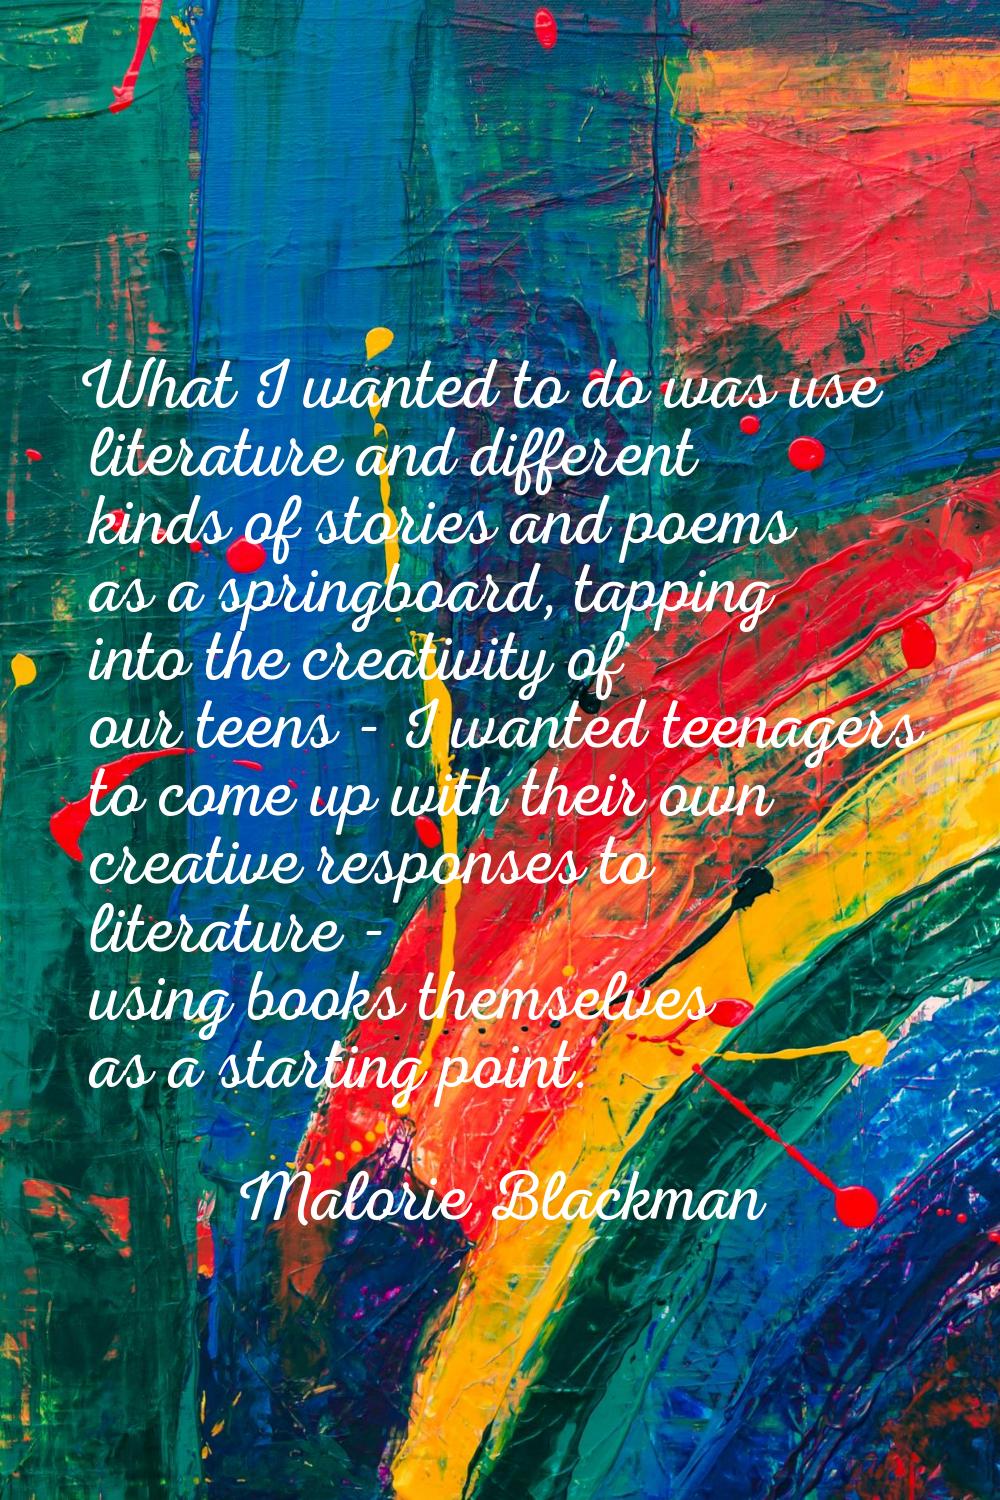 What I wanted to do was use literature and different kinds of stories and poems as a springboard, t